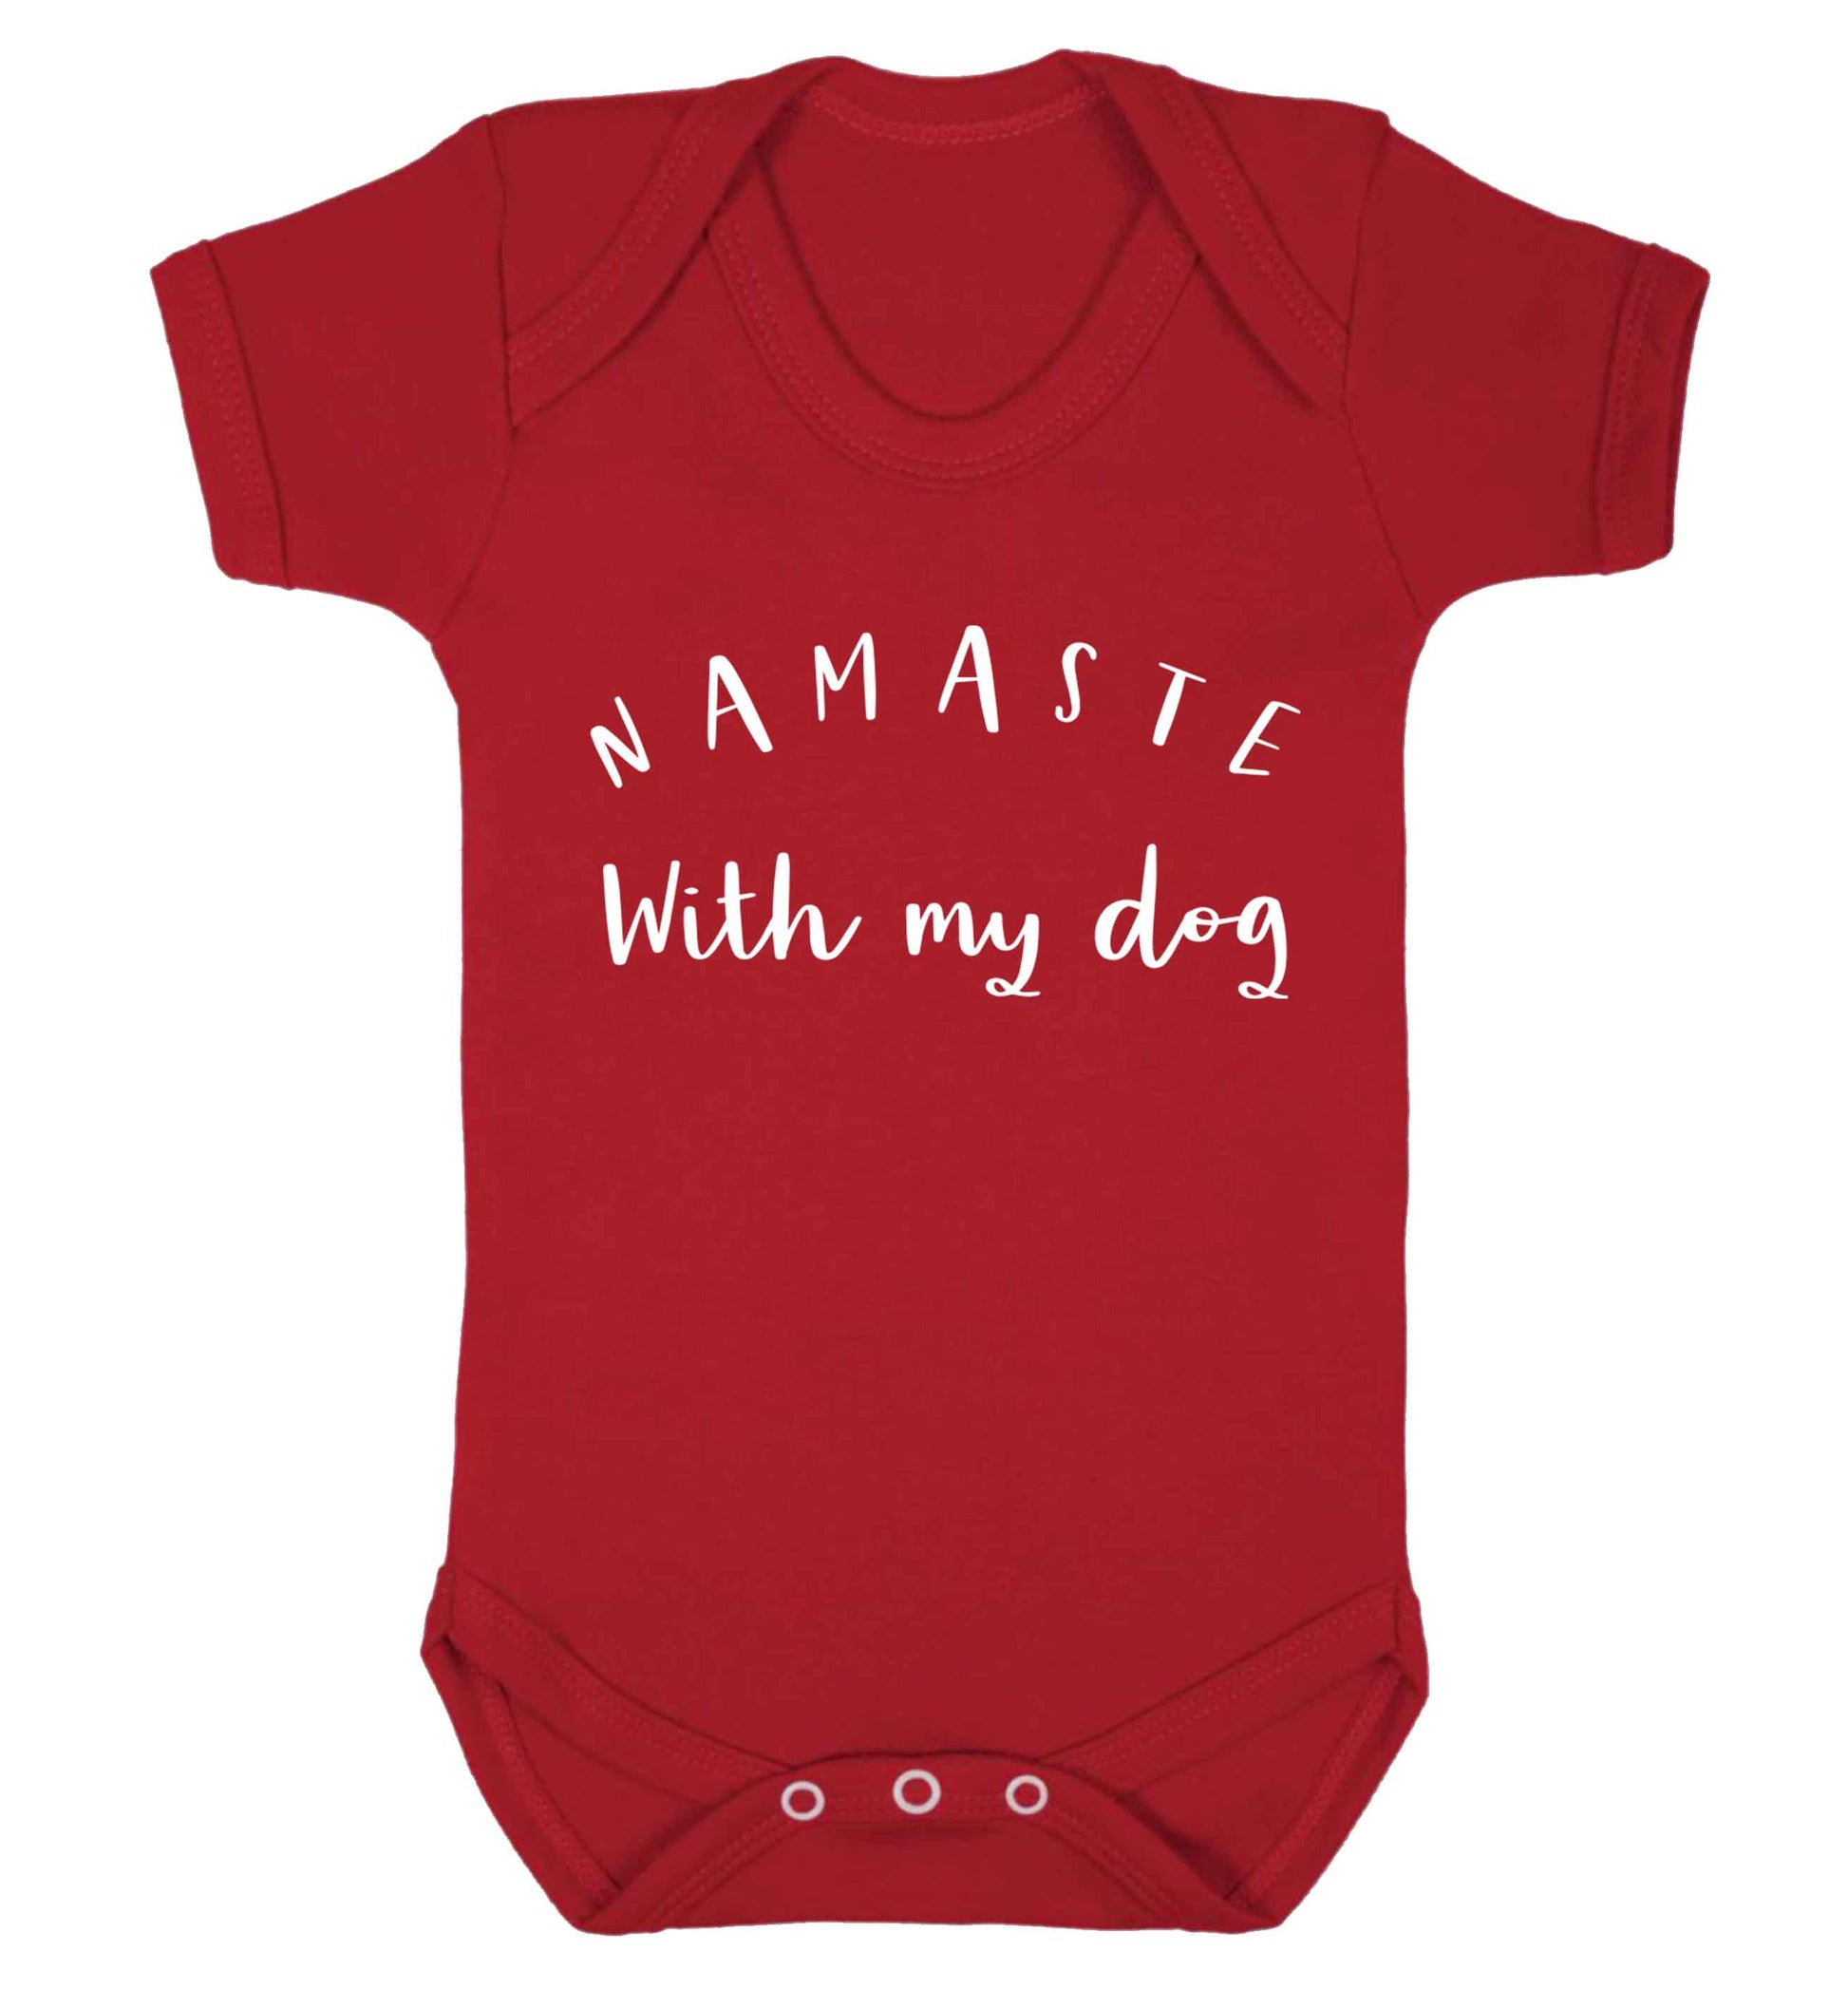 Namaste with my dog Baby Vest red 18-24 months